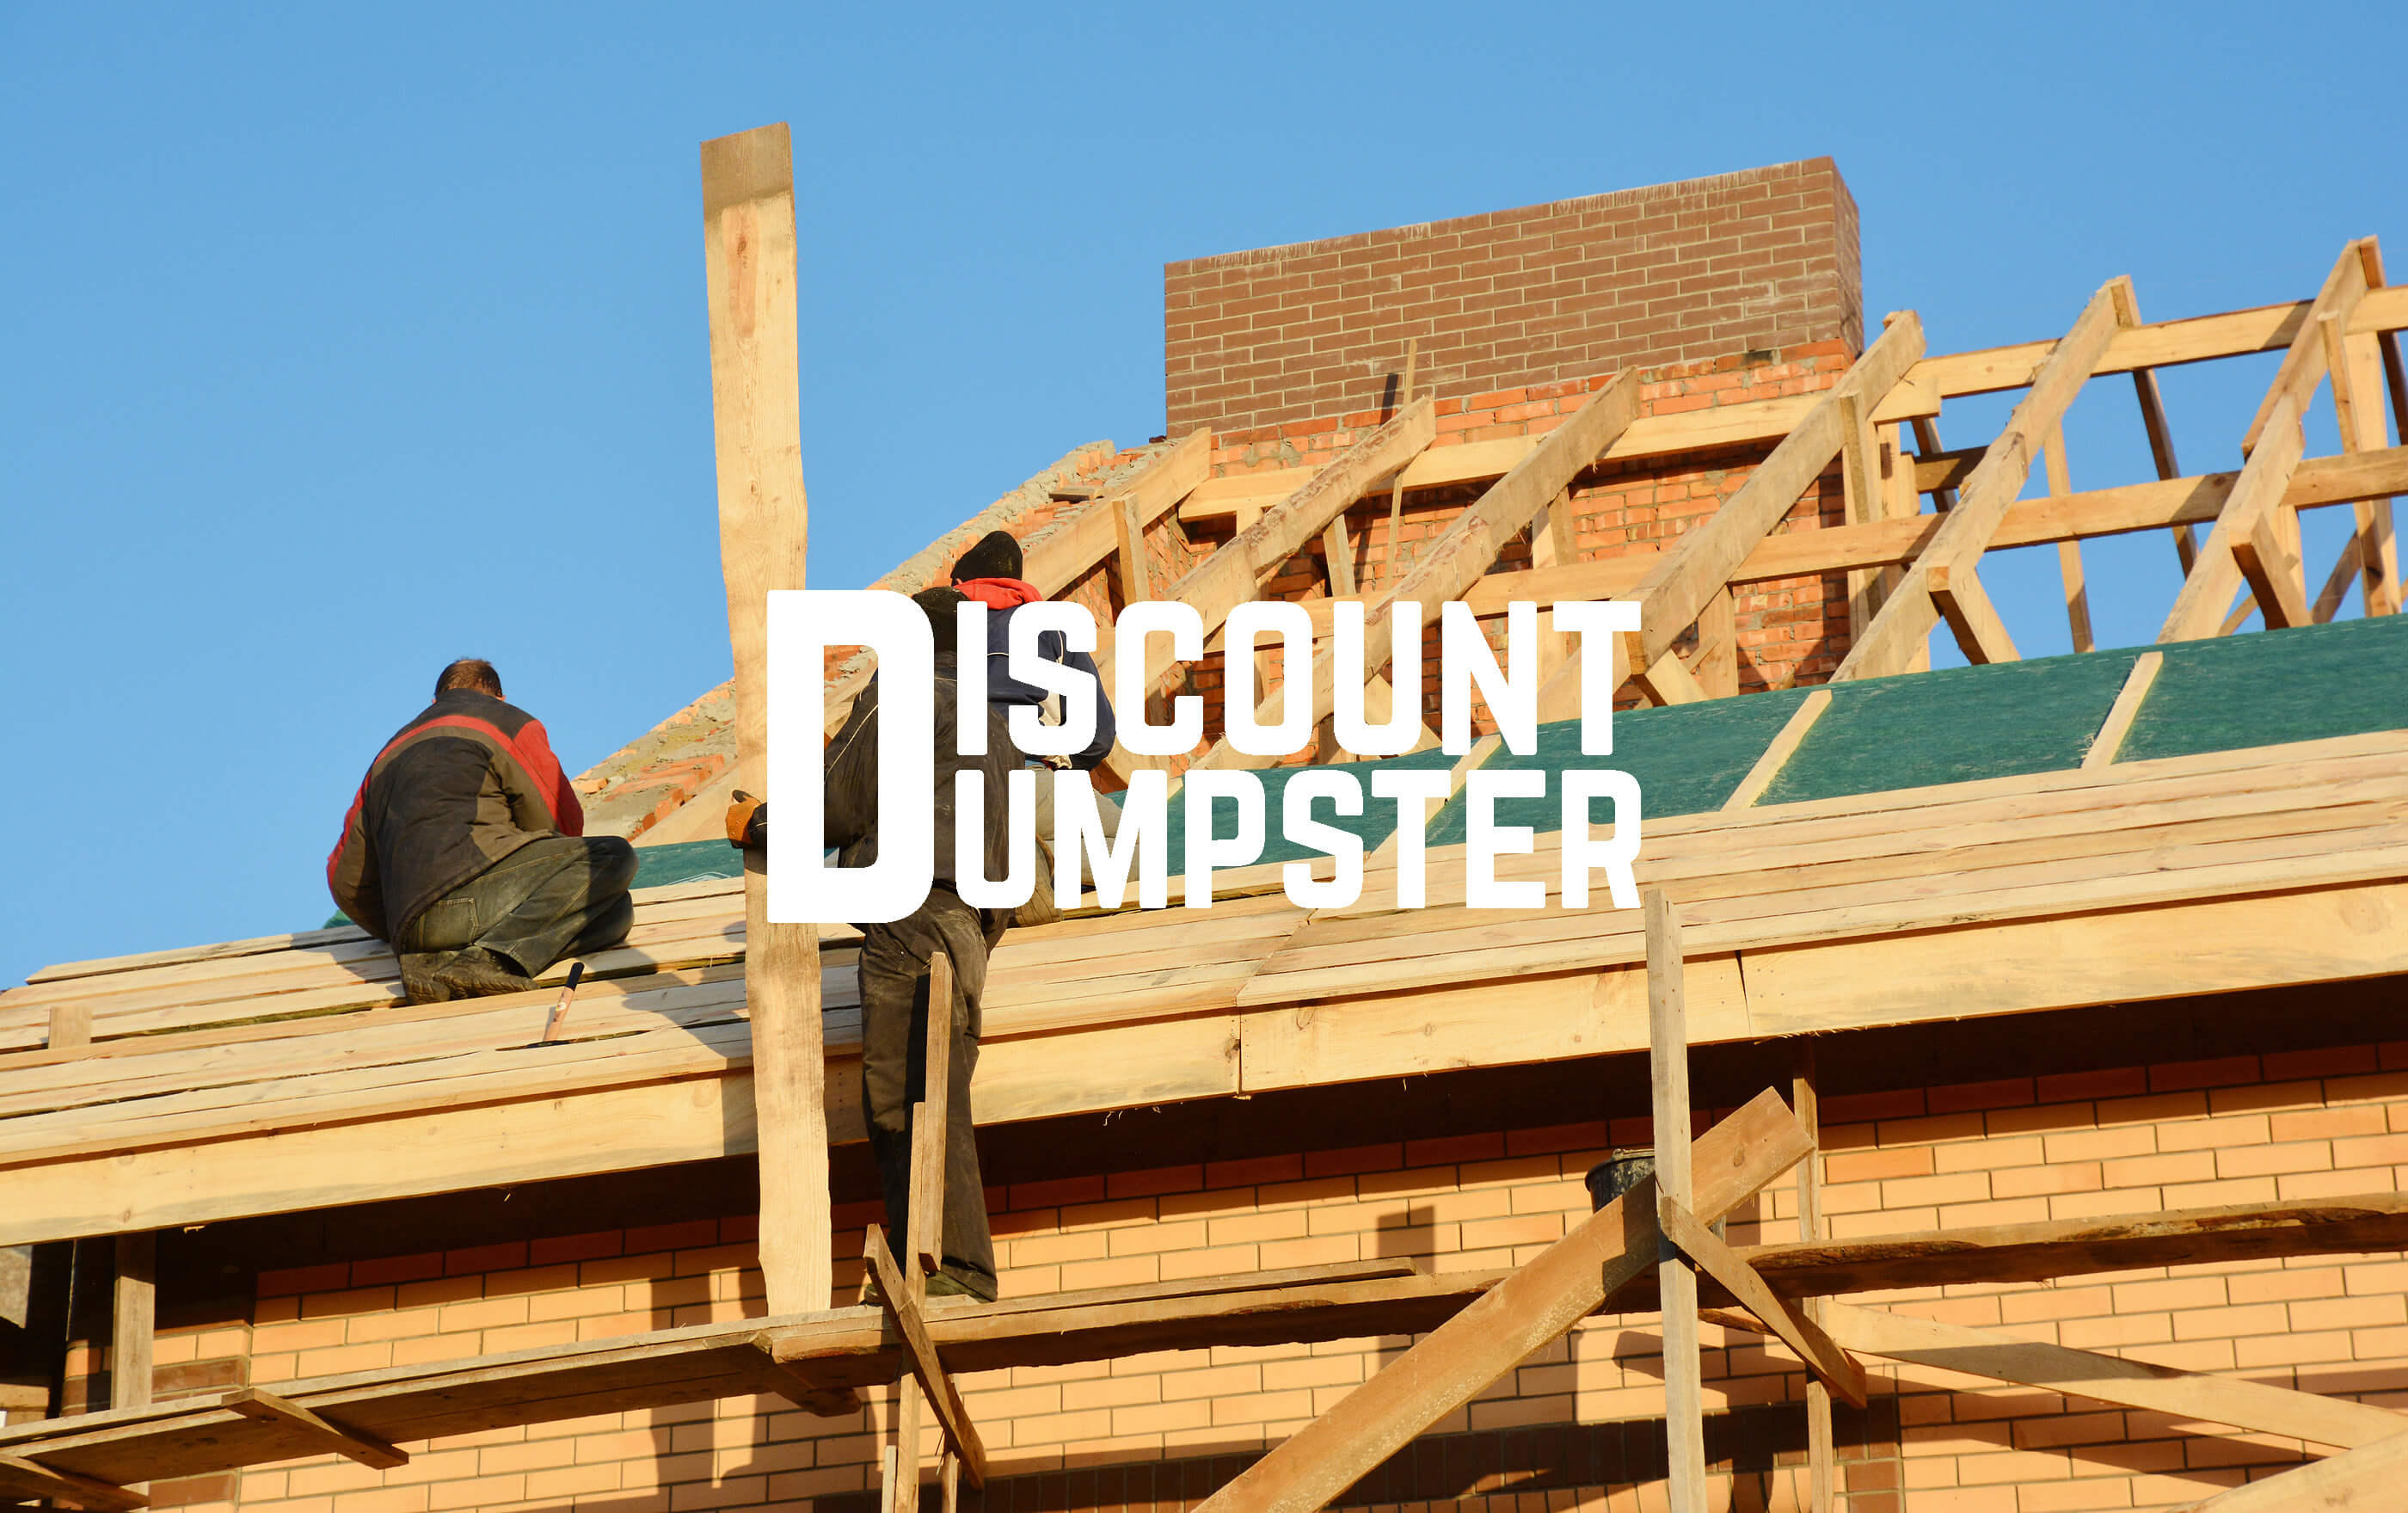 Discount dumpster removes waste from your construction or home improvement site in Chicago il Discount Dumpster Chicago (312)549-9198